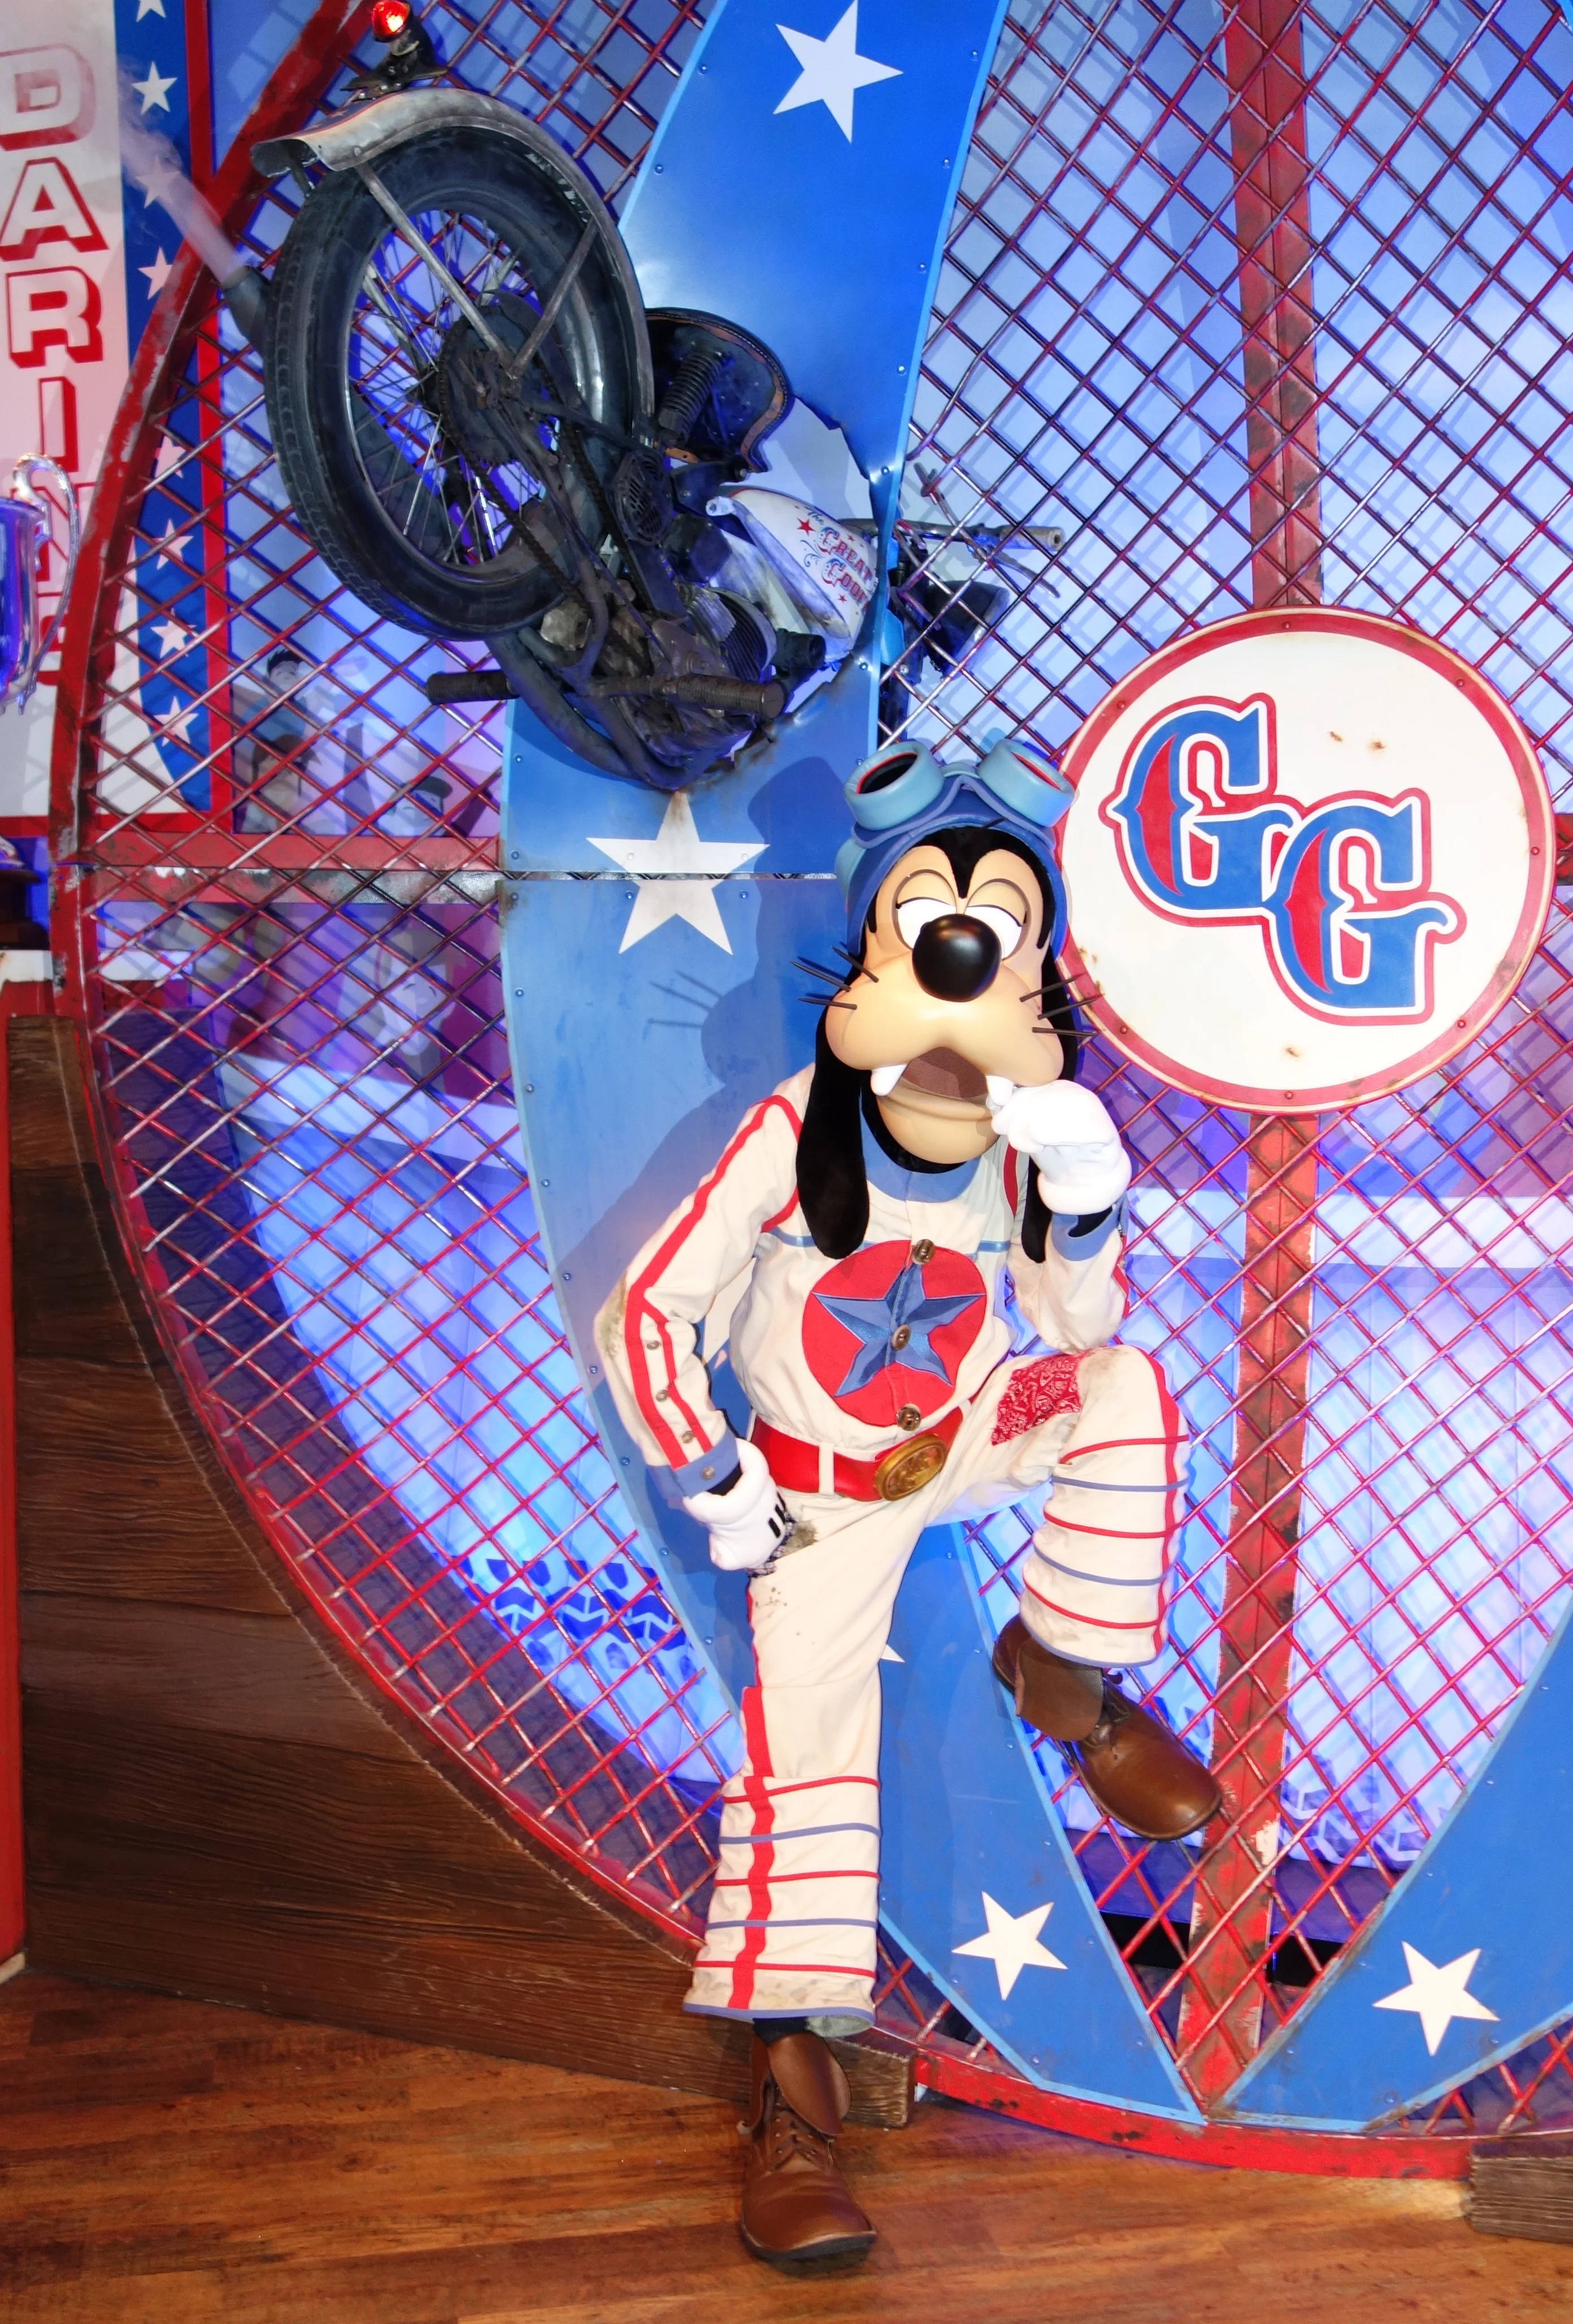 I asked Goofy to pose for me and he went all GQ on me.